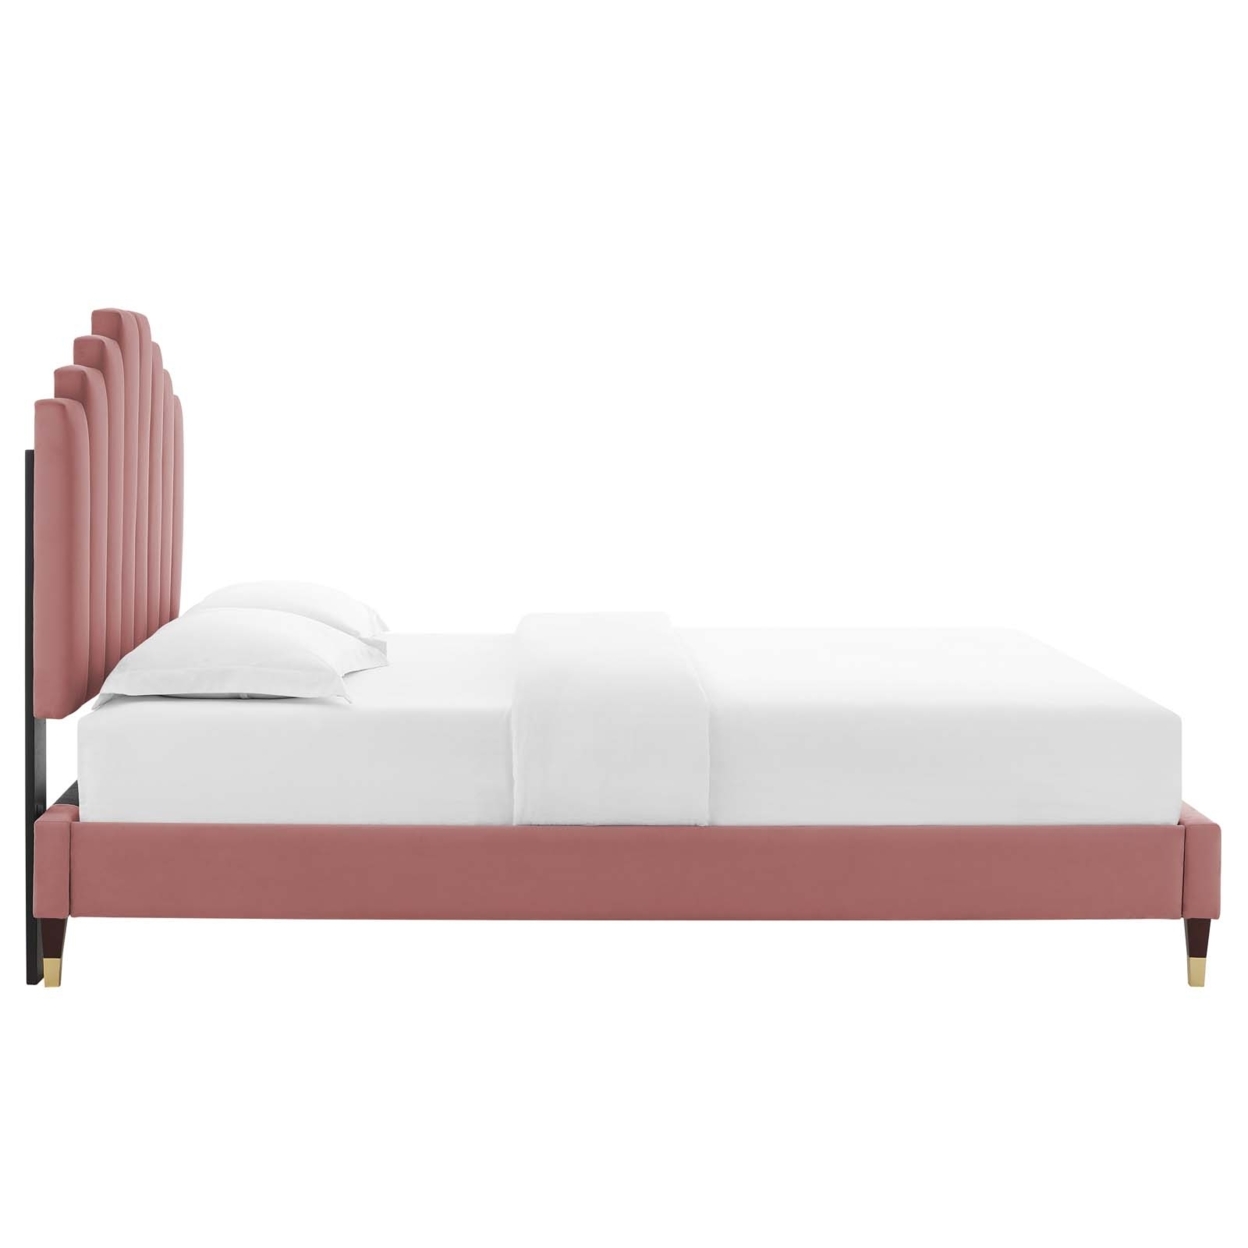 Channel Tufted Twin Platform Bed With Gold Sleeve Wood Leg, Pink, Saltoro Sherpi